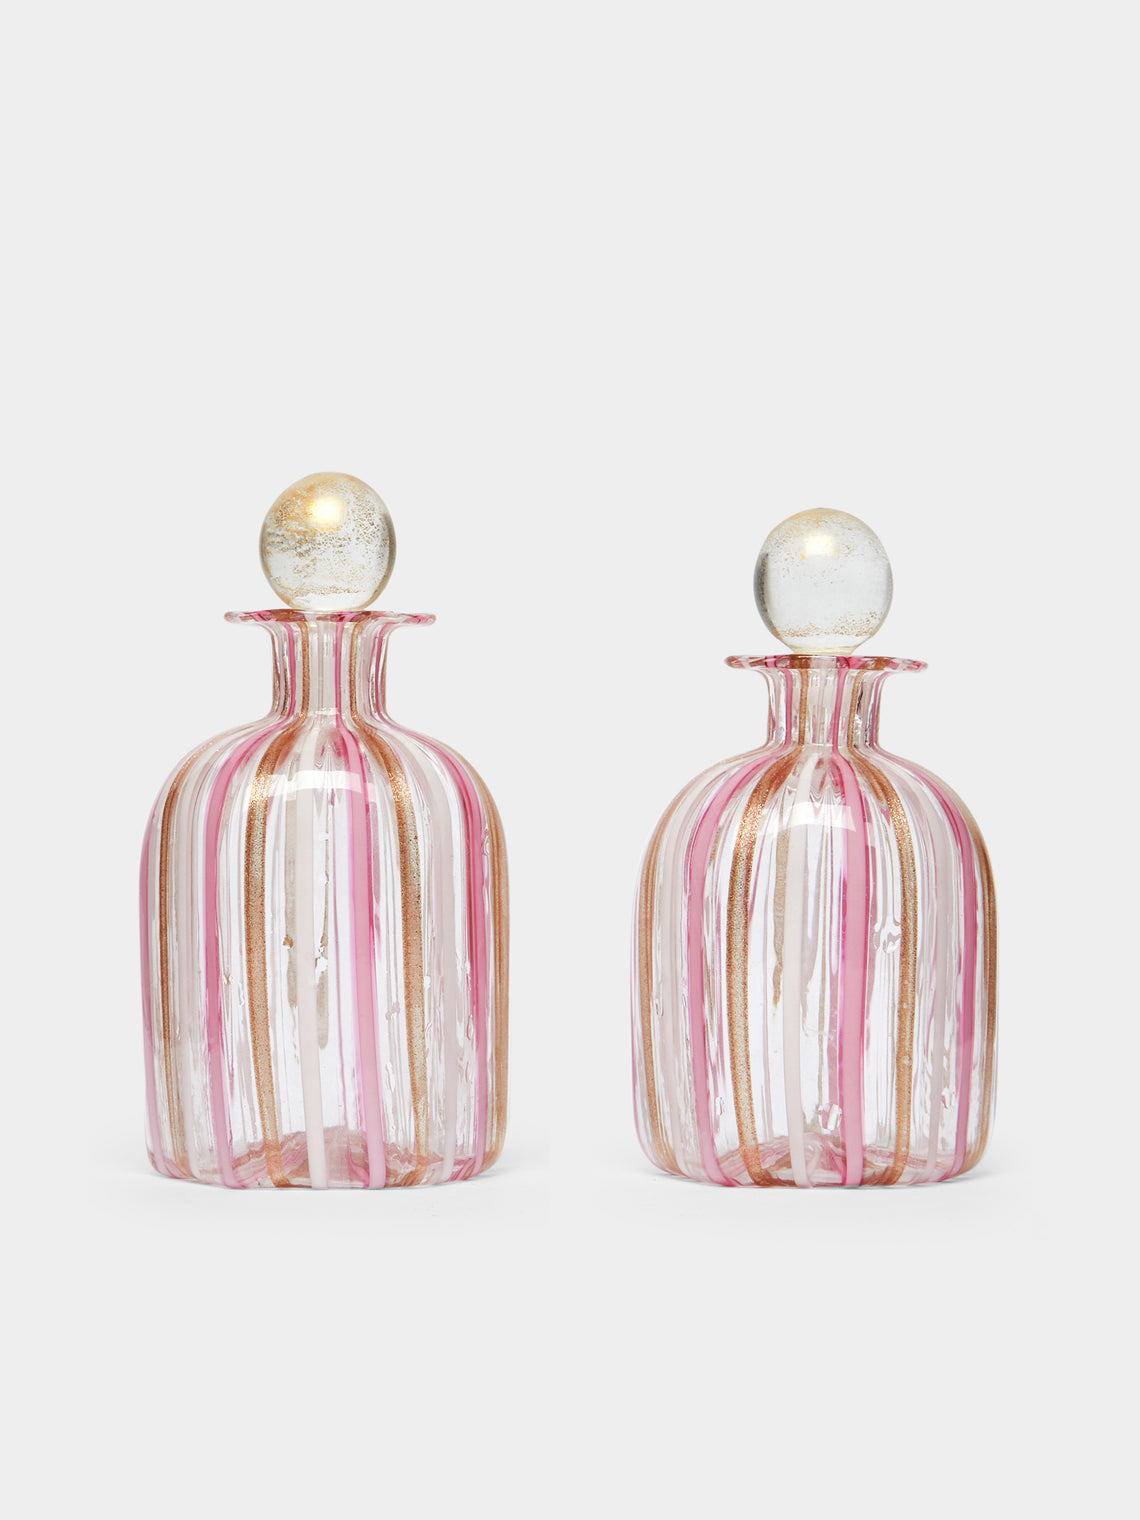 Antique and Vintage - Early 20th Century Murano Ribbon Perfume Bottles (Set of 2) -  - ABASK - 